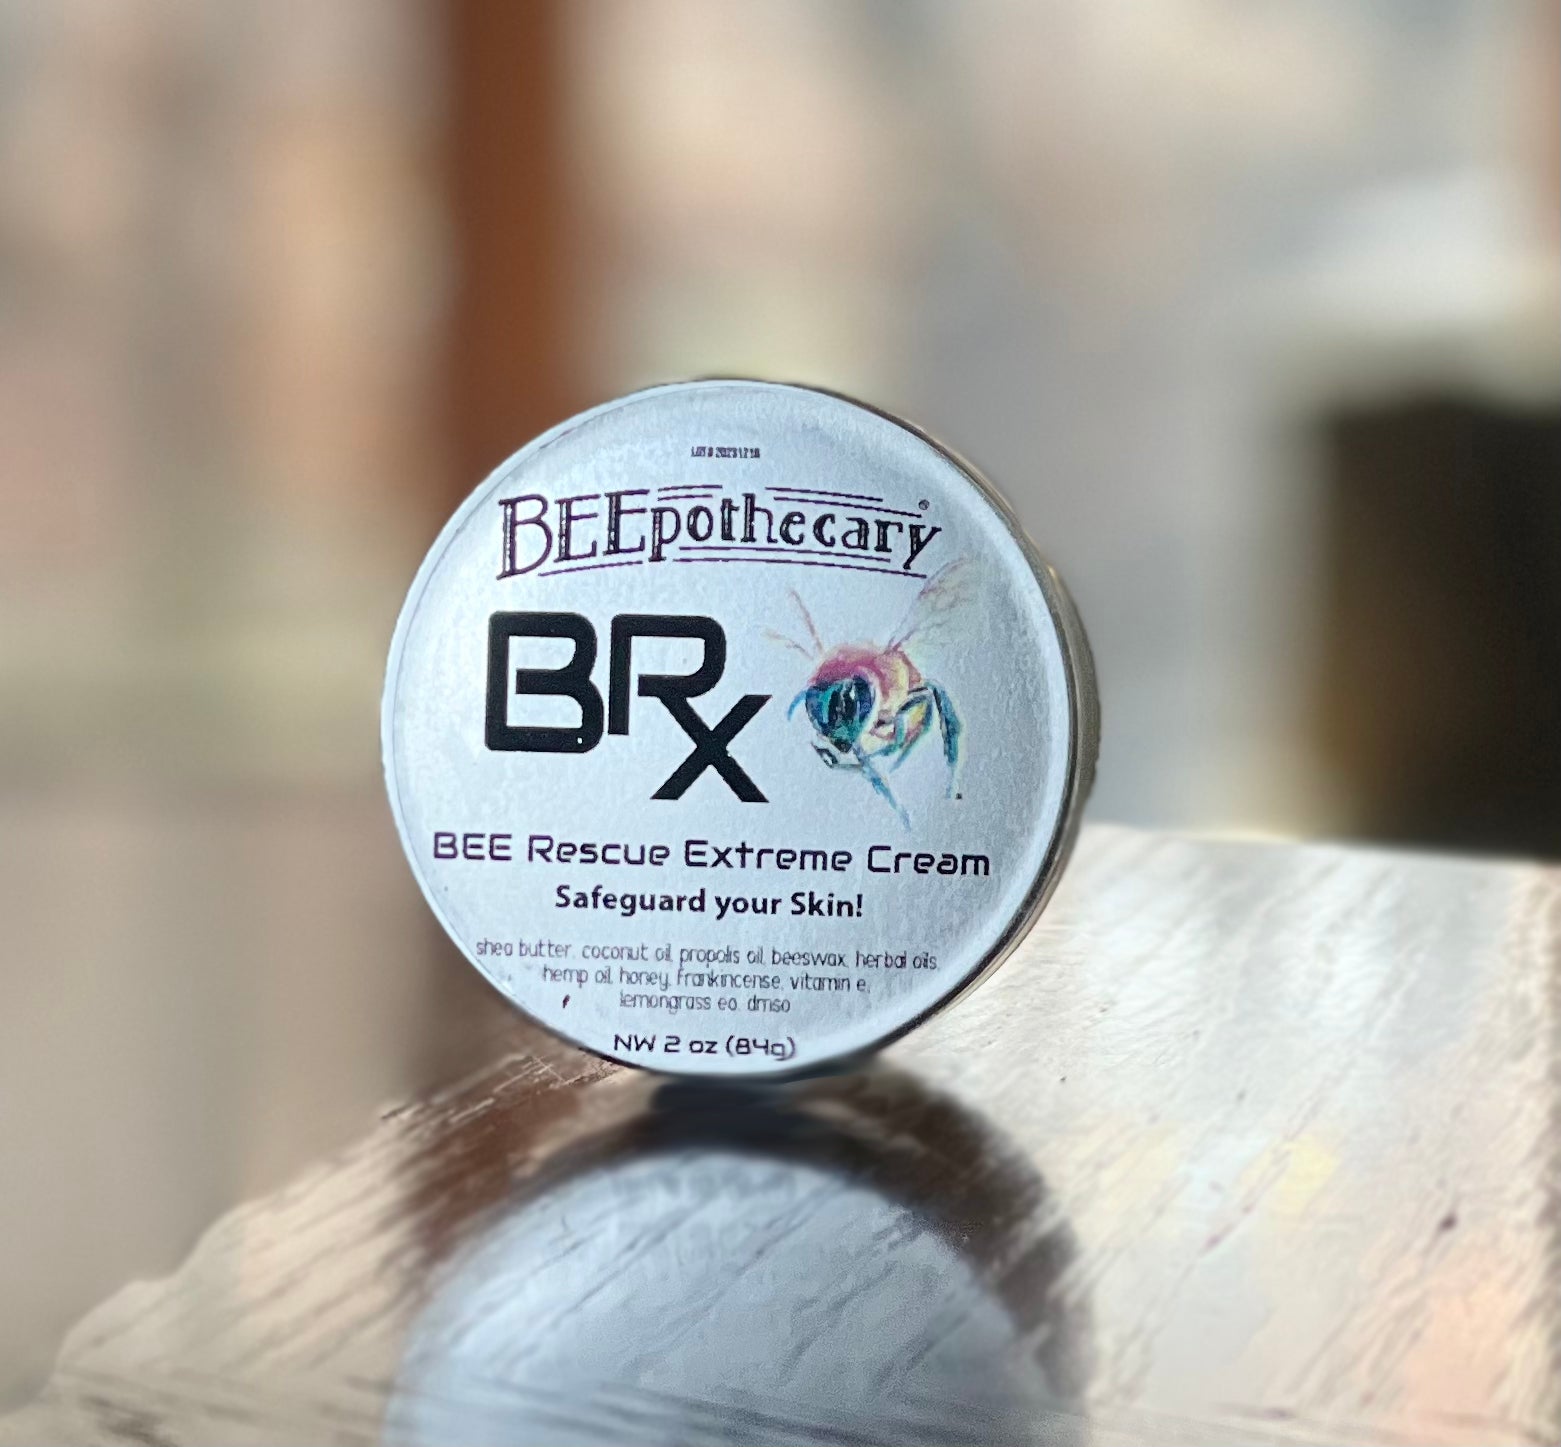 BEEpothecary BEE Rescue Extreme Cream in silver 2 oz container